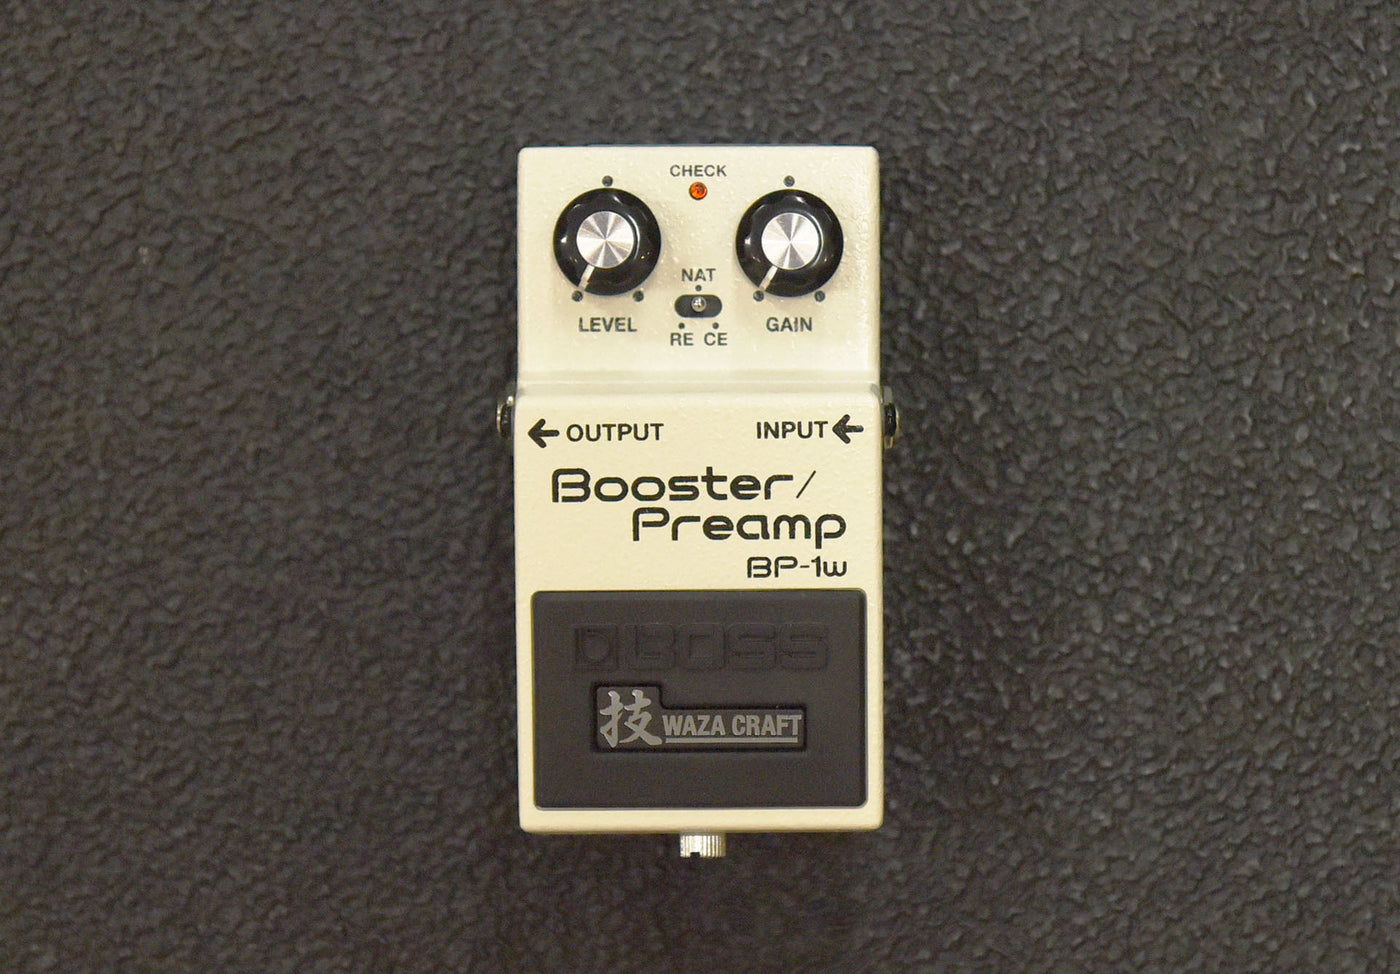 BP-1w Booster/Preamp